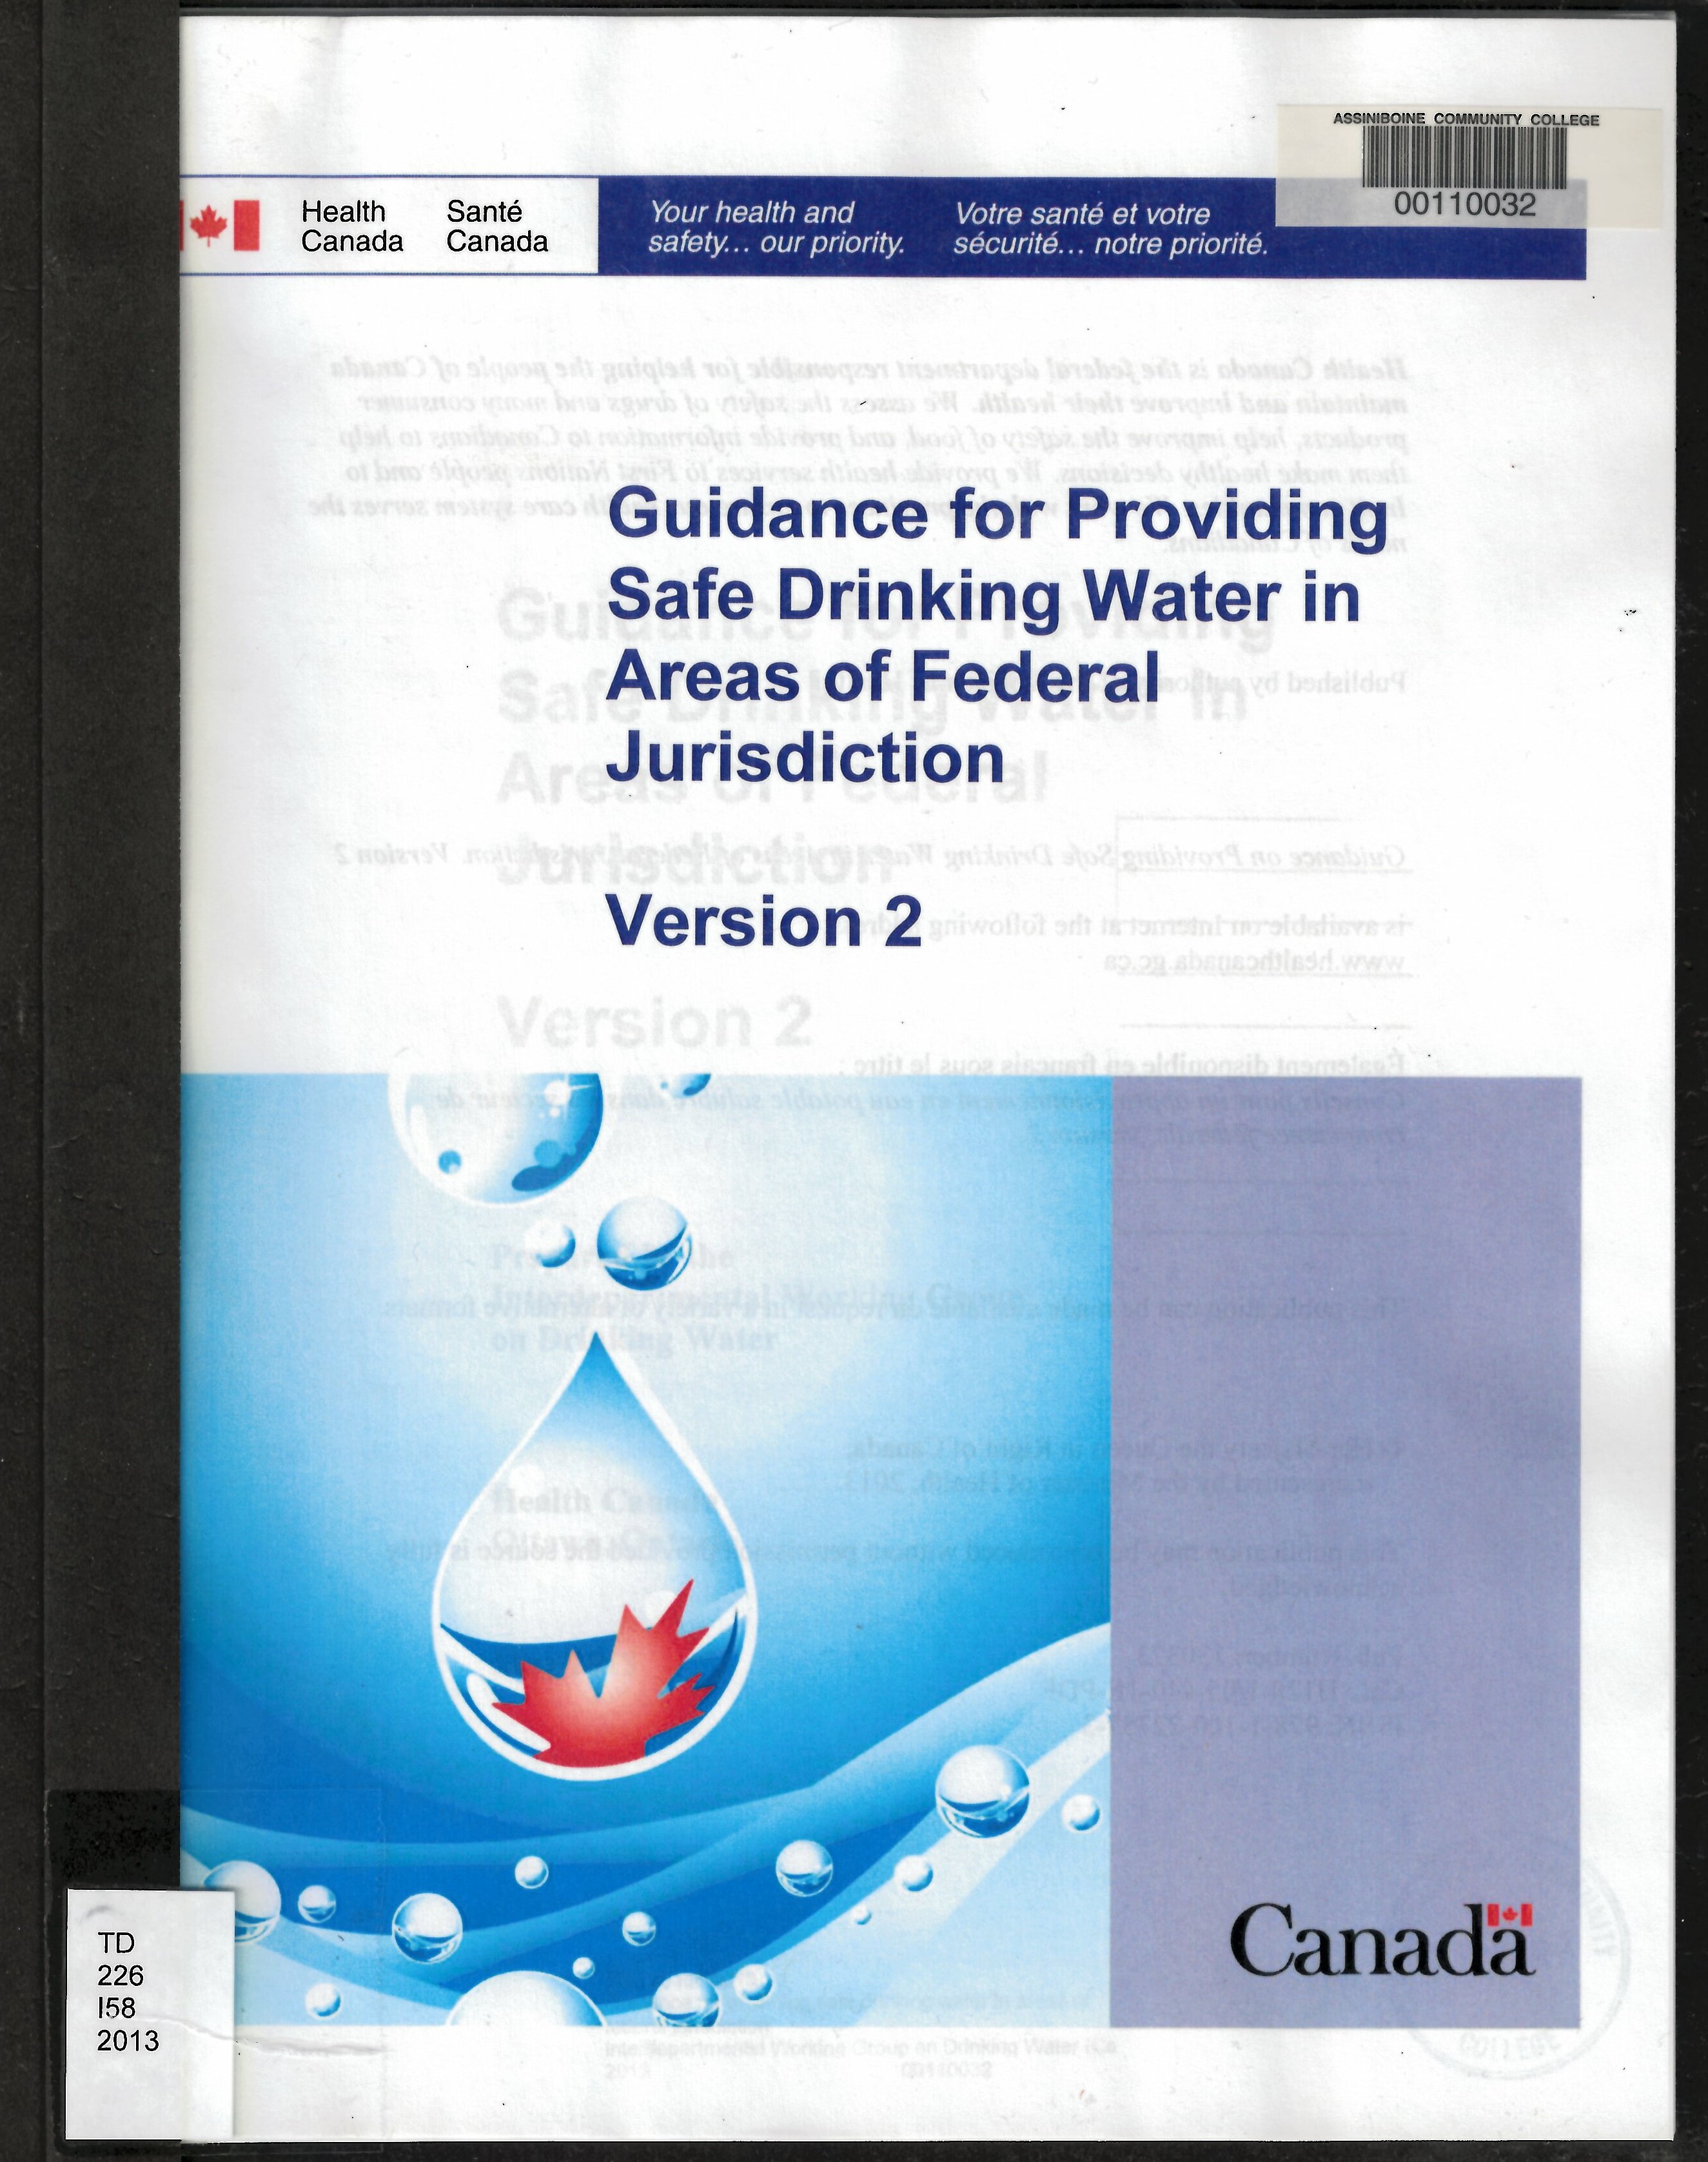 Guidance for providing safe drinking water in areas of federal jurisdiction